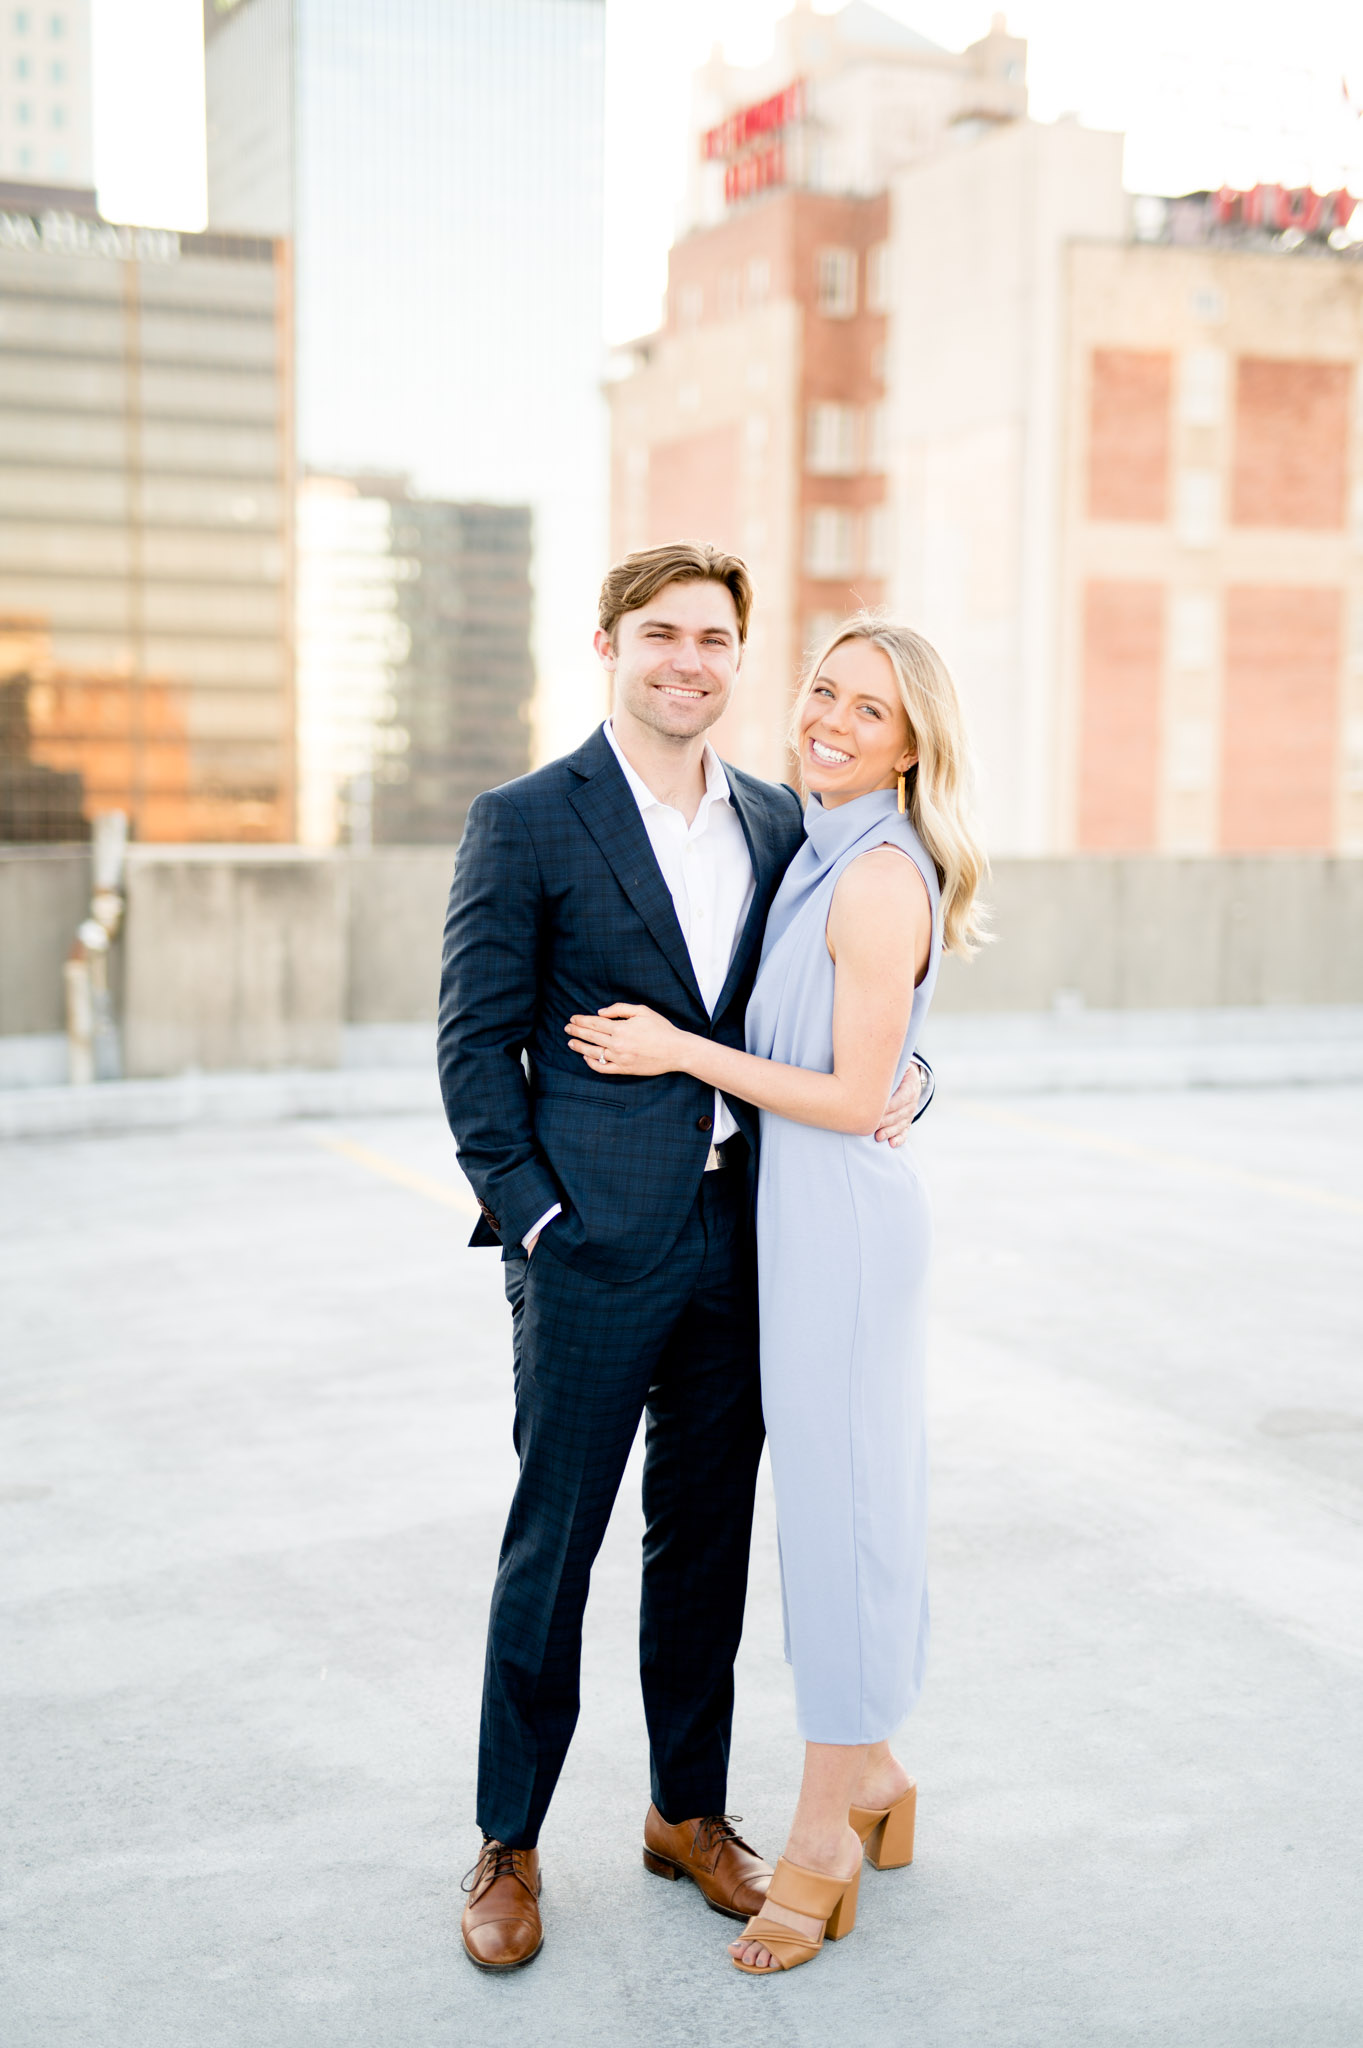 Couple smiles at camera while on city rooftop.